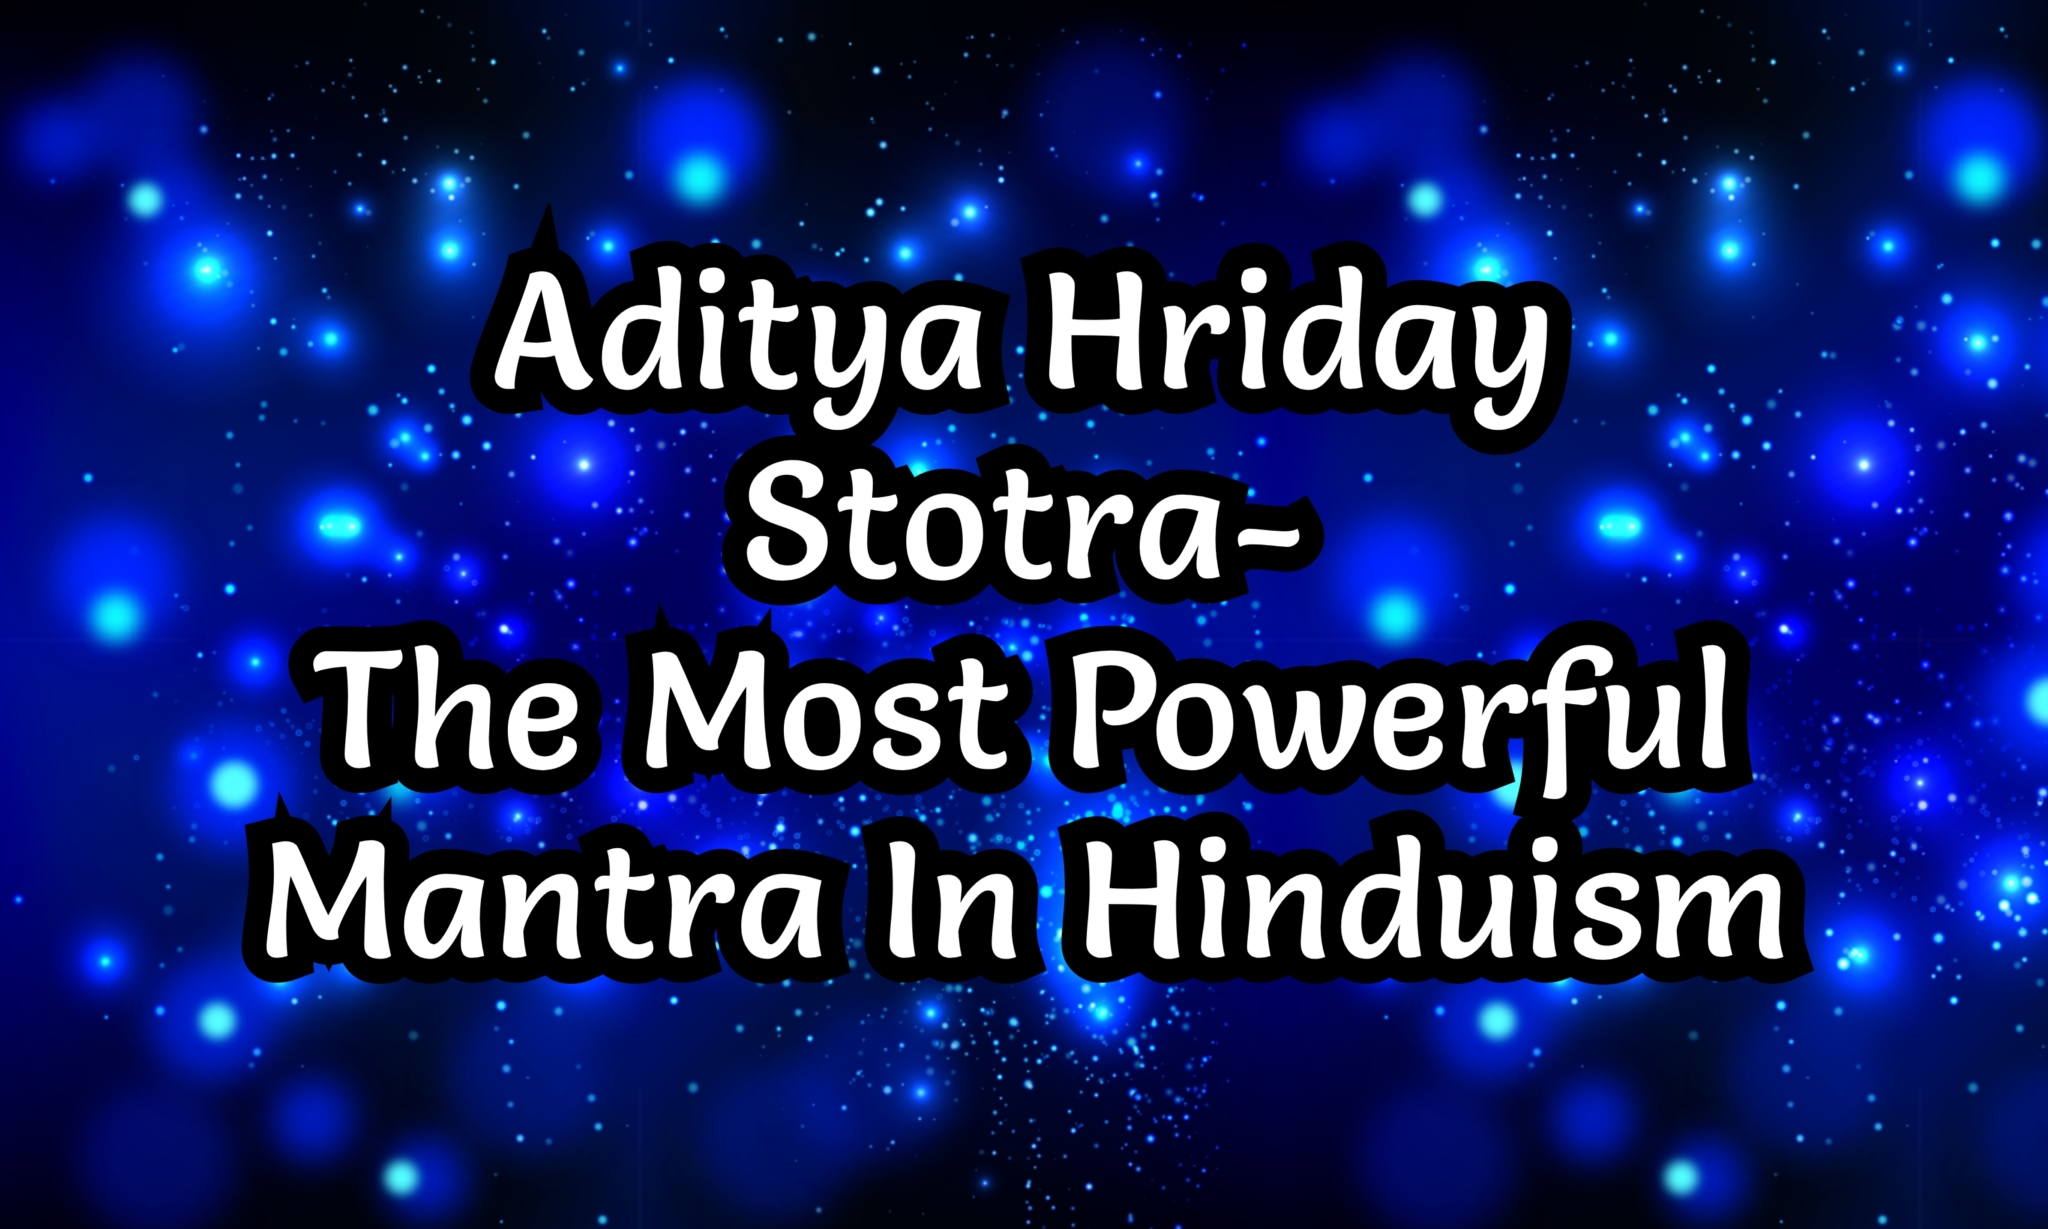 Aditya Hriday Stotra- The Most Powerful Mantra In Hinduism